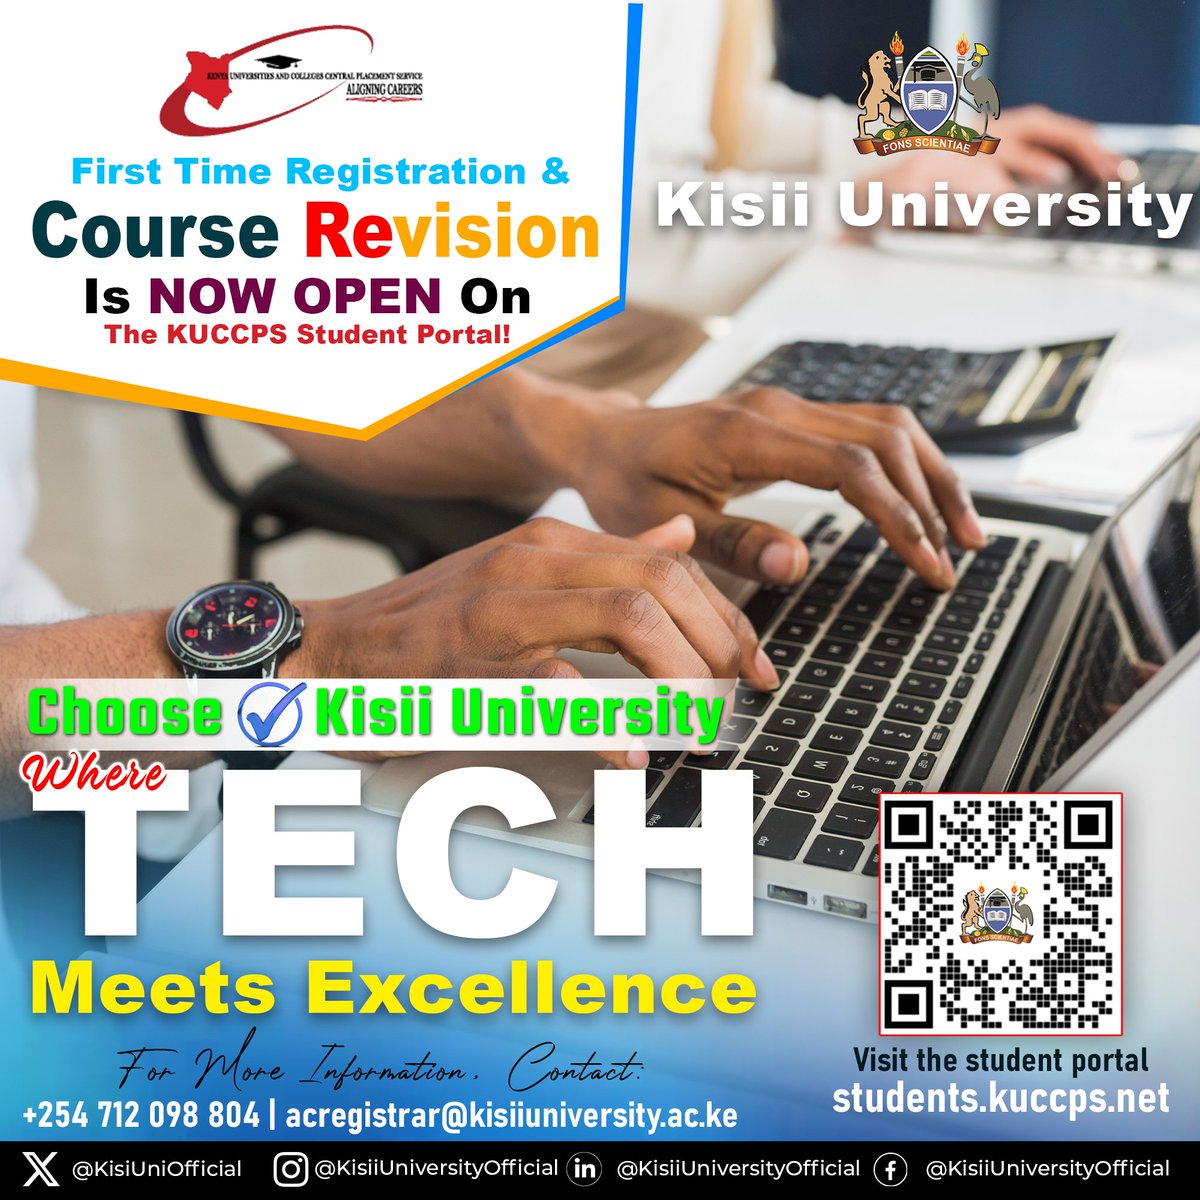 Welcome to Kisii University, where technology meets passion. Our School of Information Science and Technology is not only your great choice, it's a wise choice. We will see you soon. #KisiiUniversity @EduMinKenya @KUCCPS_Official @UFKenya @HELBpage